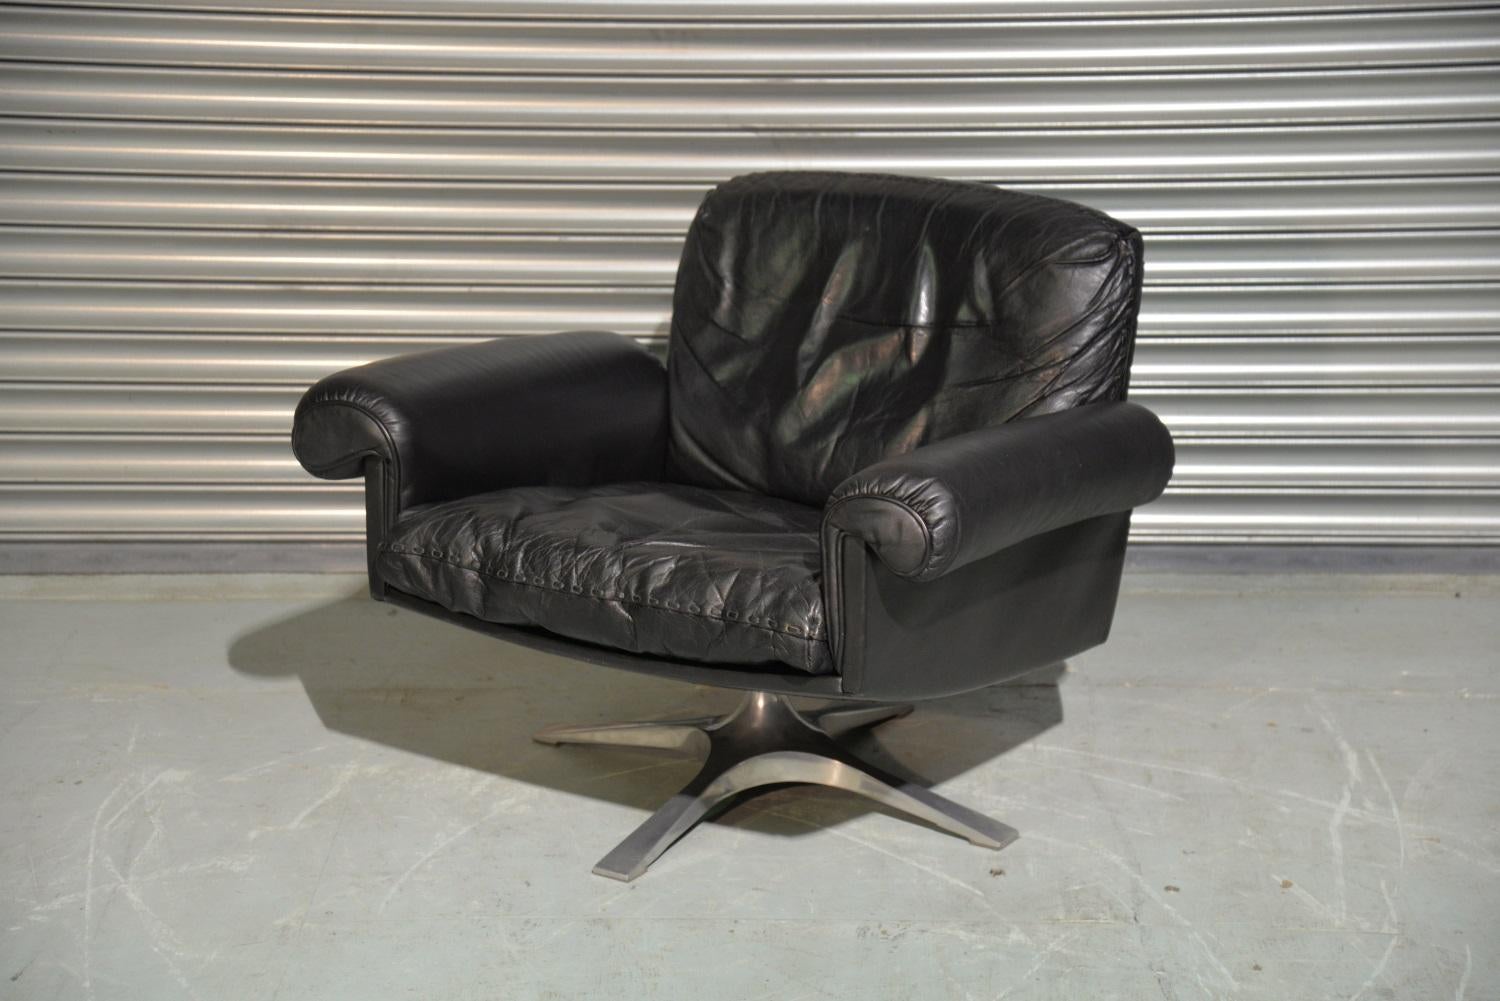 Discounted airfreight for our US and International customers ( from 2 weeks door to door)

We are delighted to bring to you a vintage 1970`s De Sede DS 31 lounge armchair in stunning black aniline leather with superb whipstitch edge detail. This